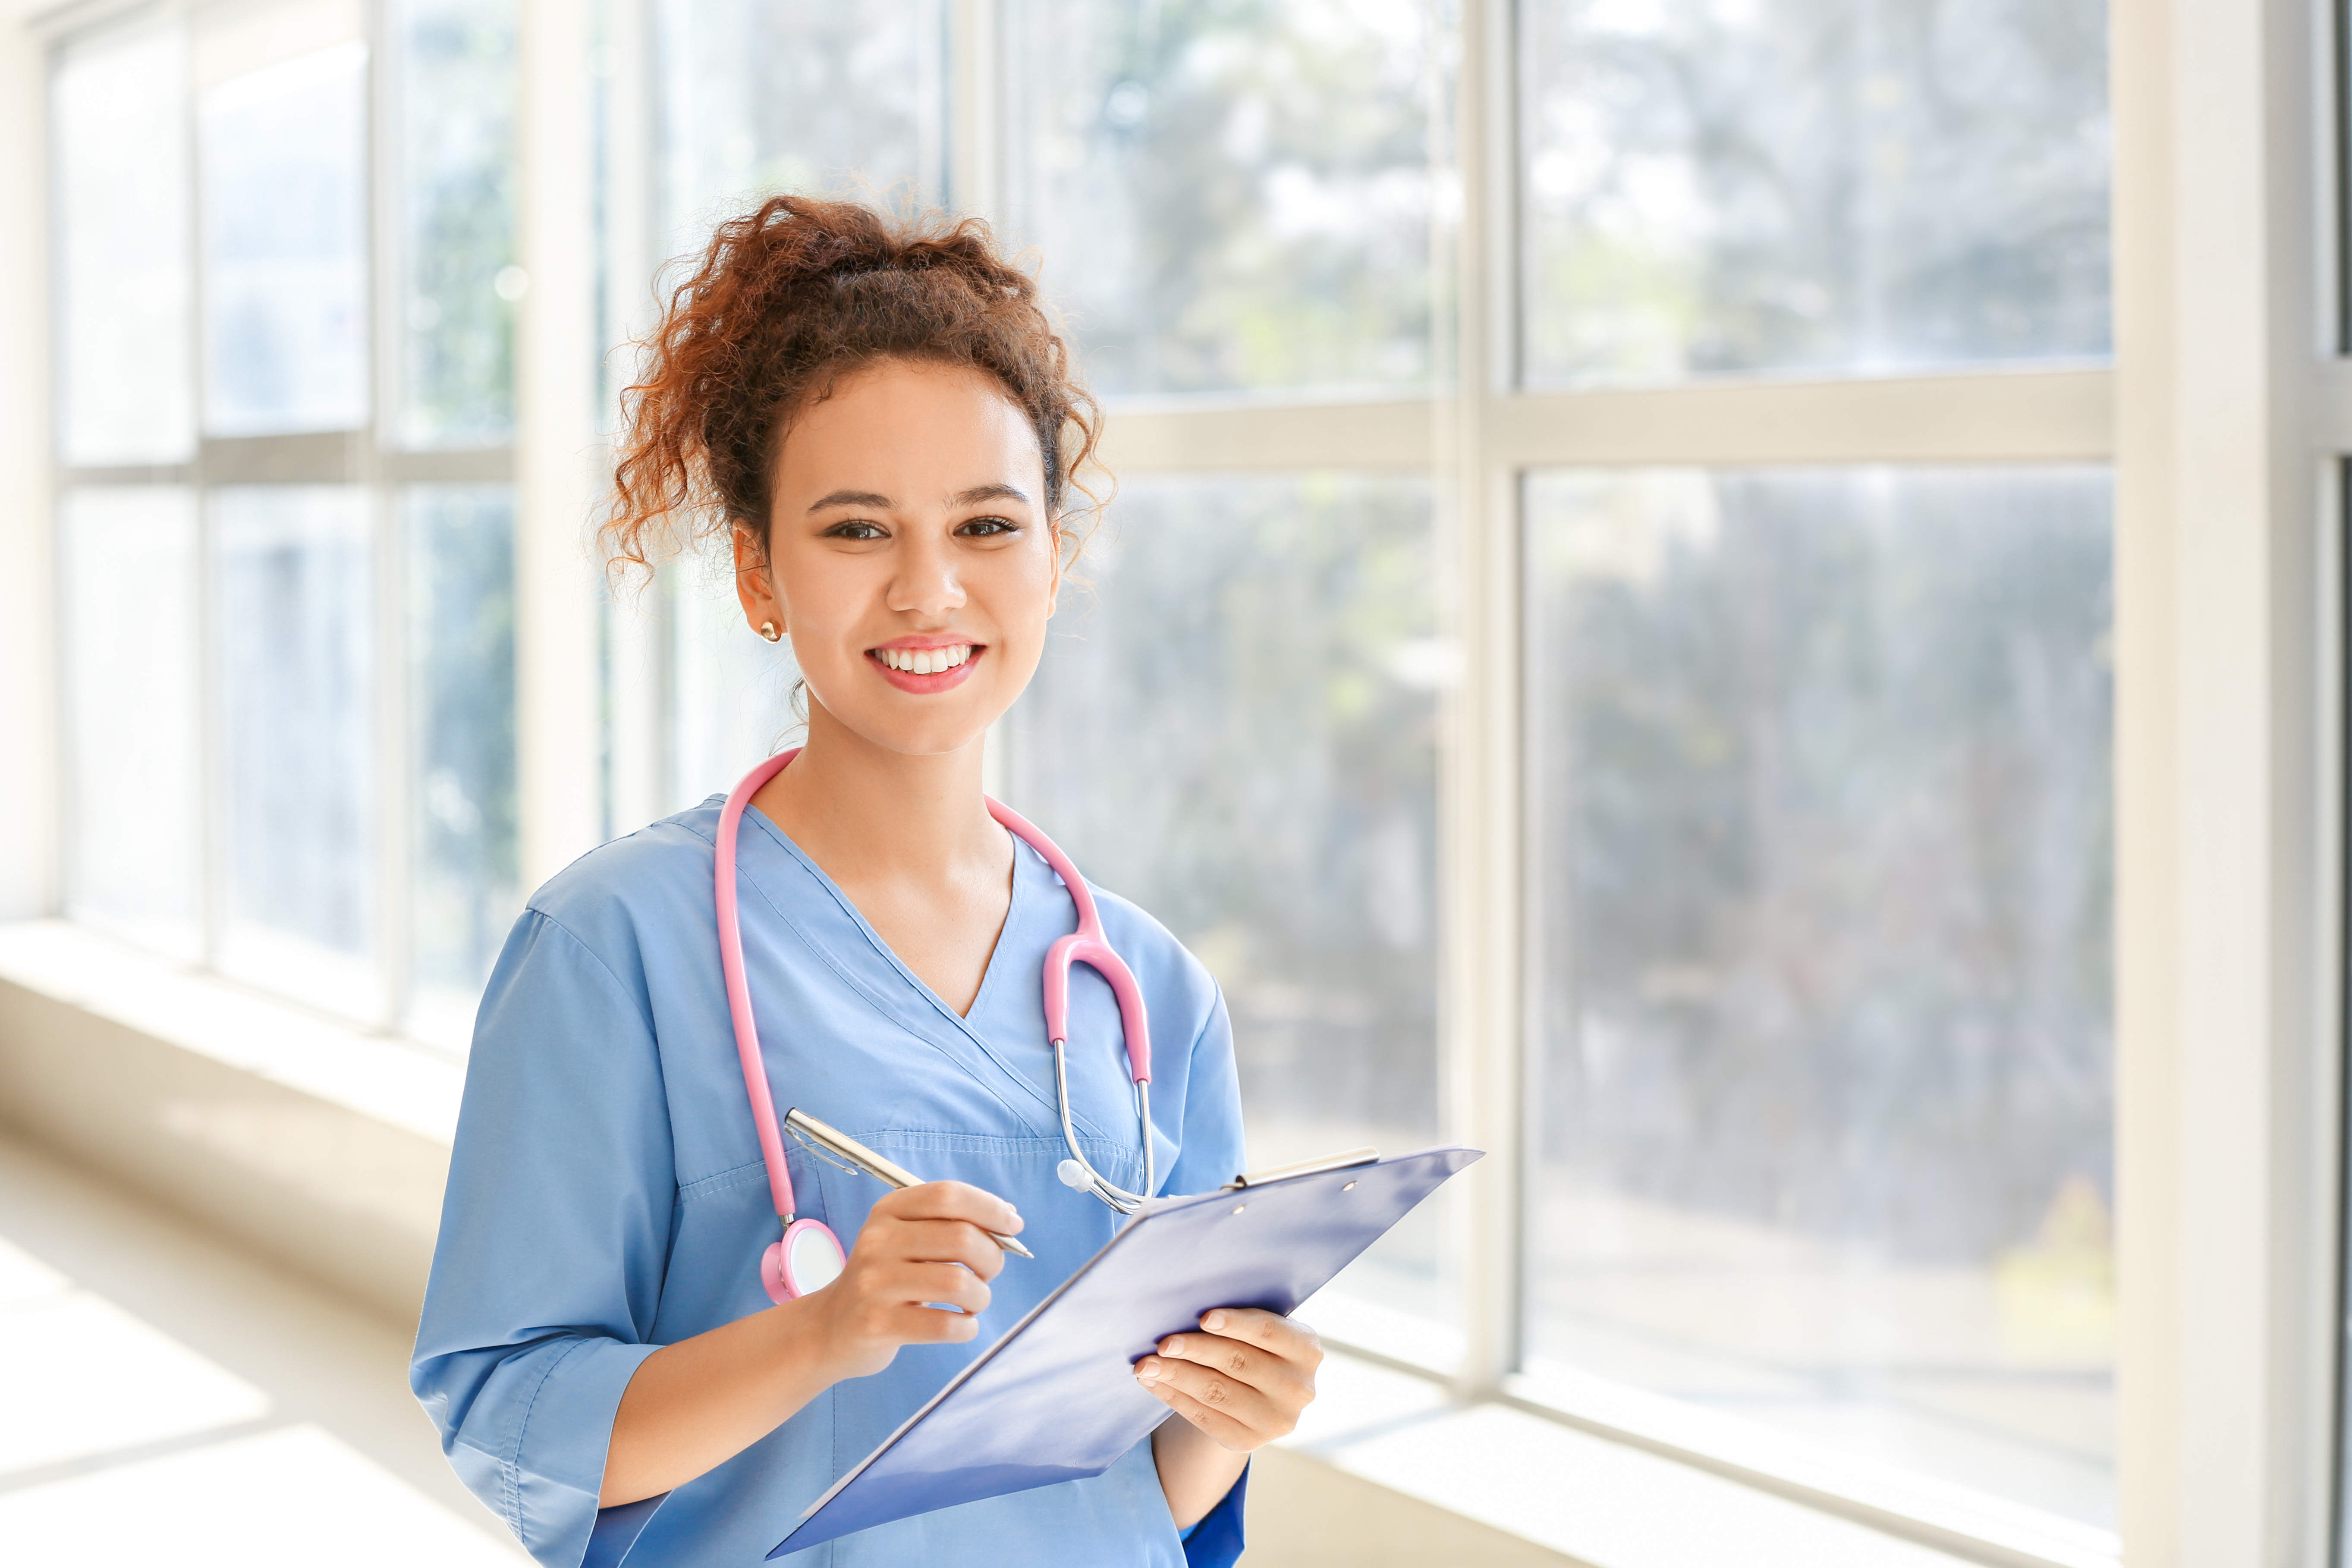 A young female nurse smiling | Source: Shutterstock